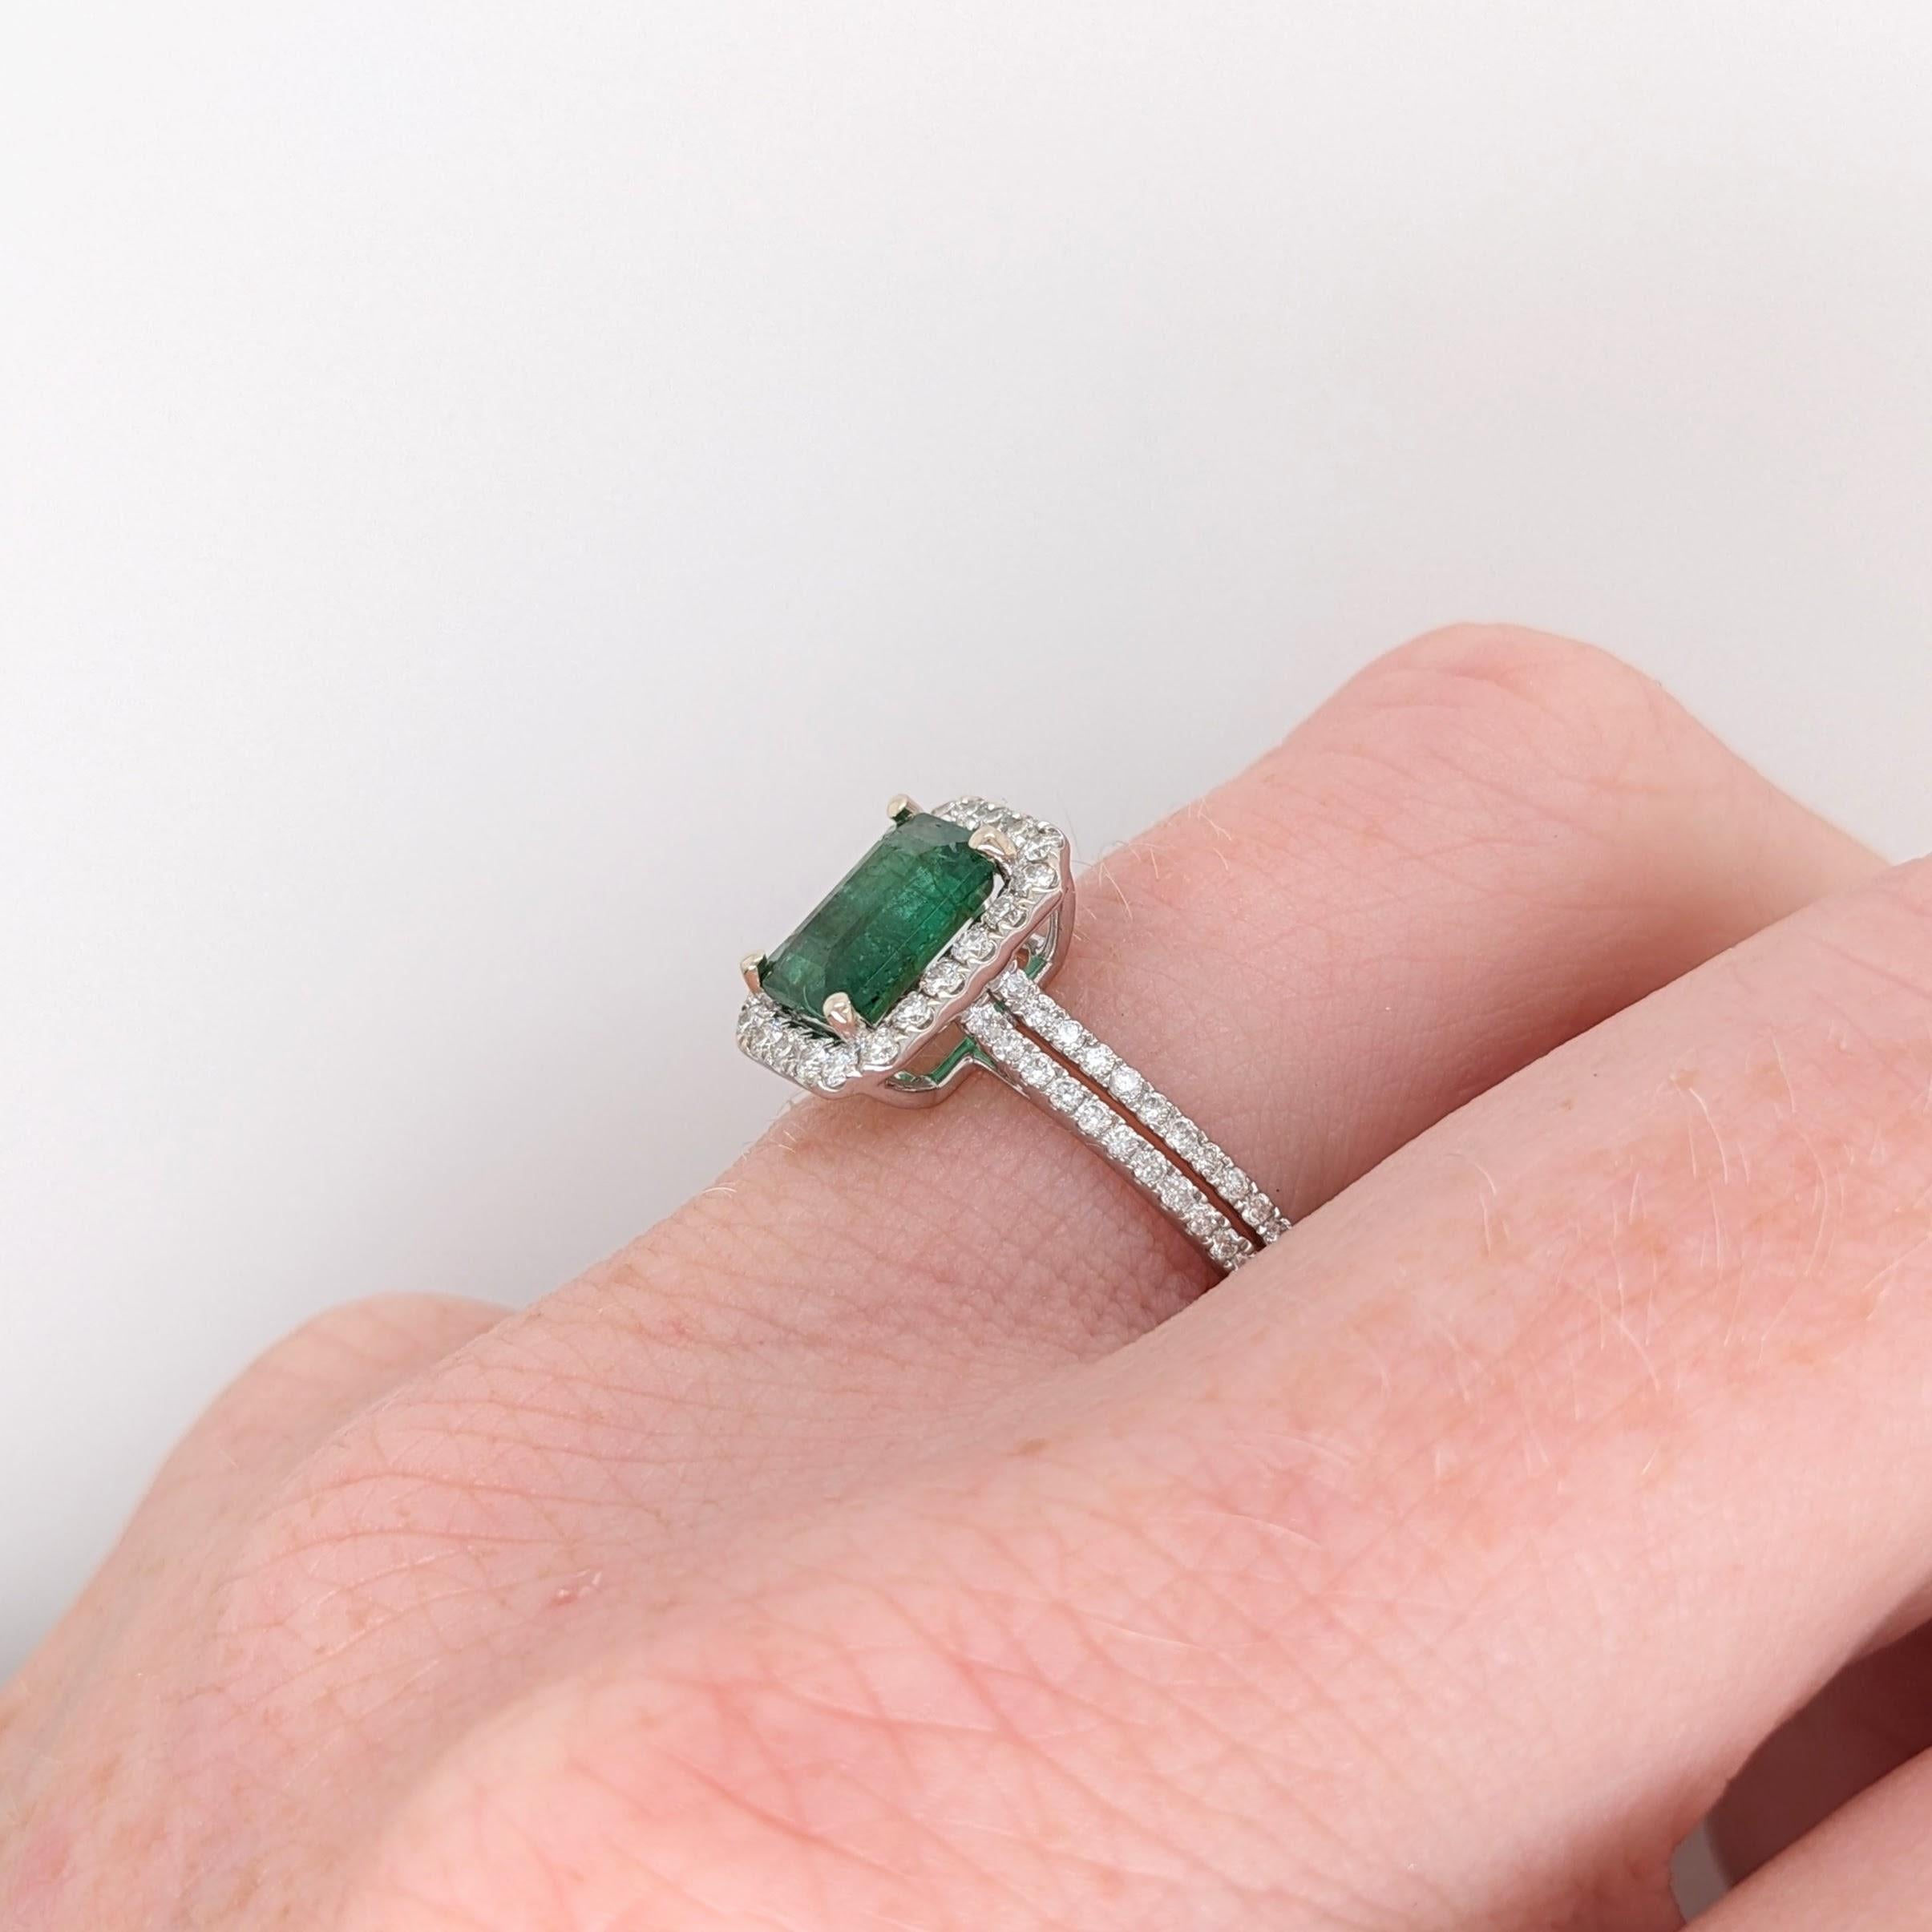 1.27ct Emerald Ring w Natural Diamond Halo in 14K White Gold Emerald Cut 8x6mm For Sale 3